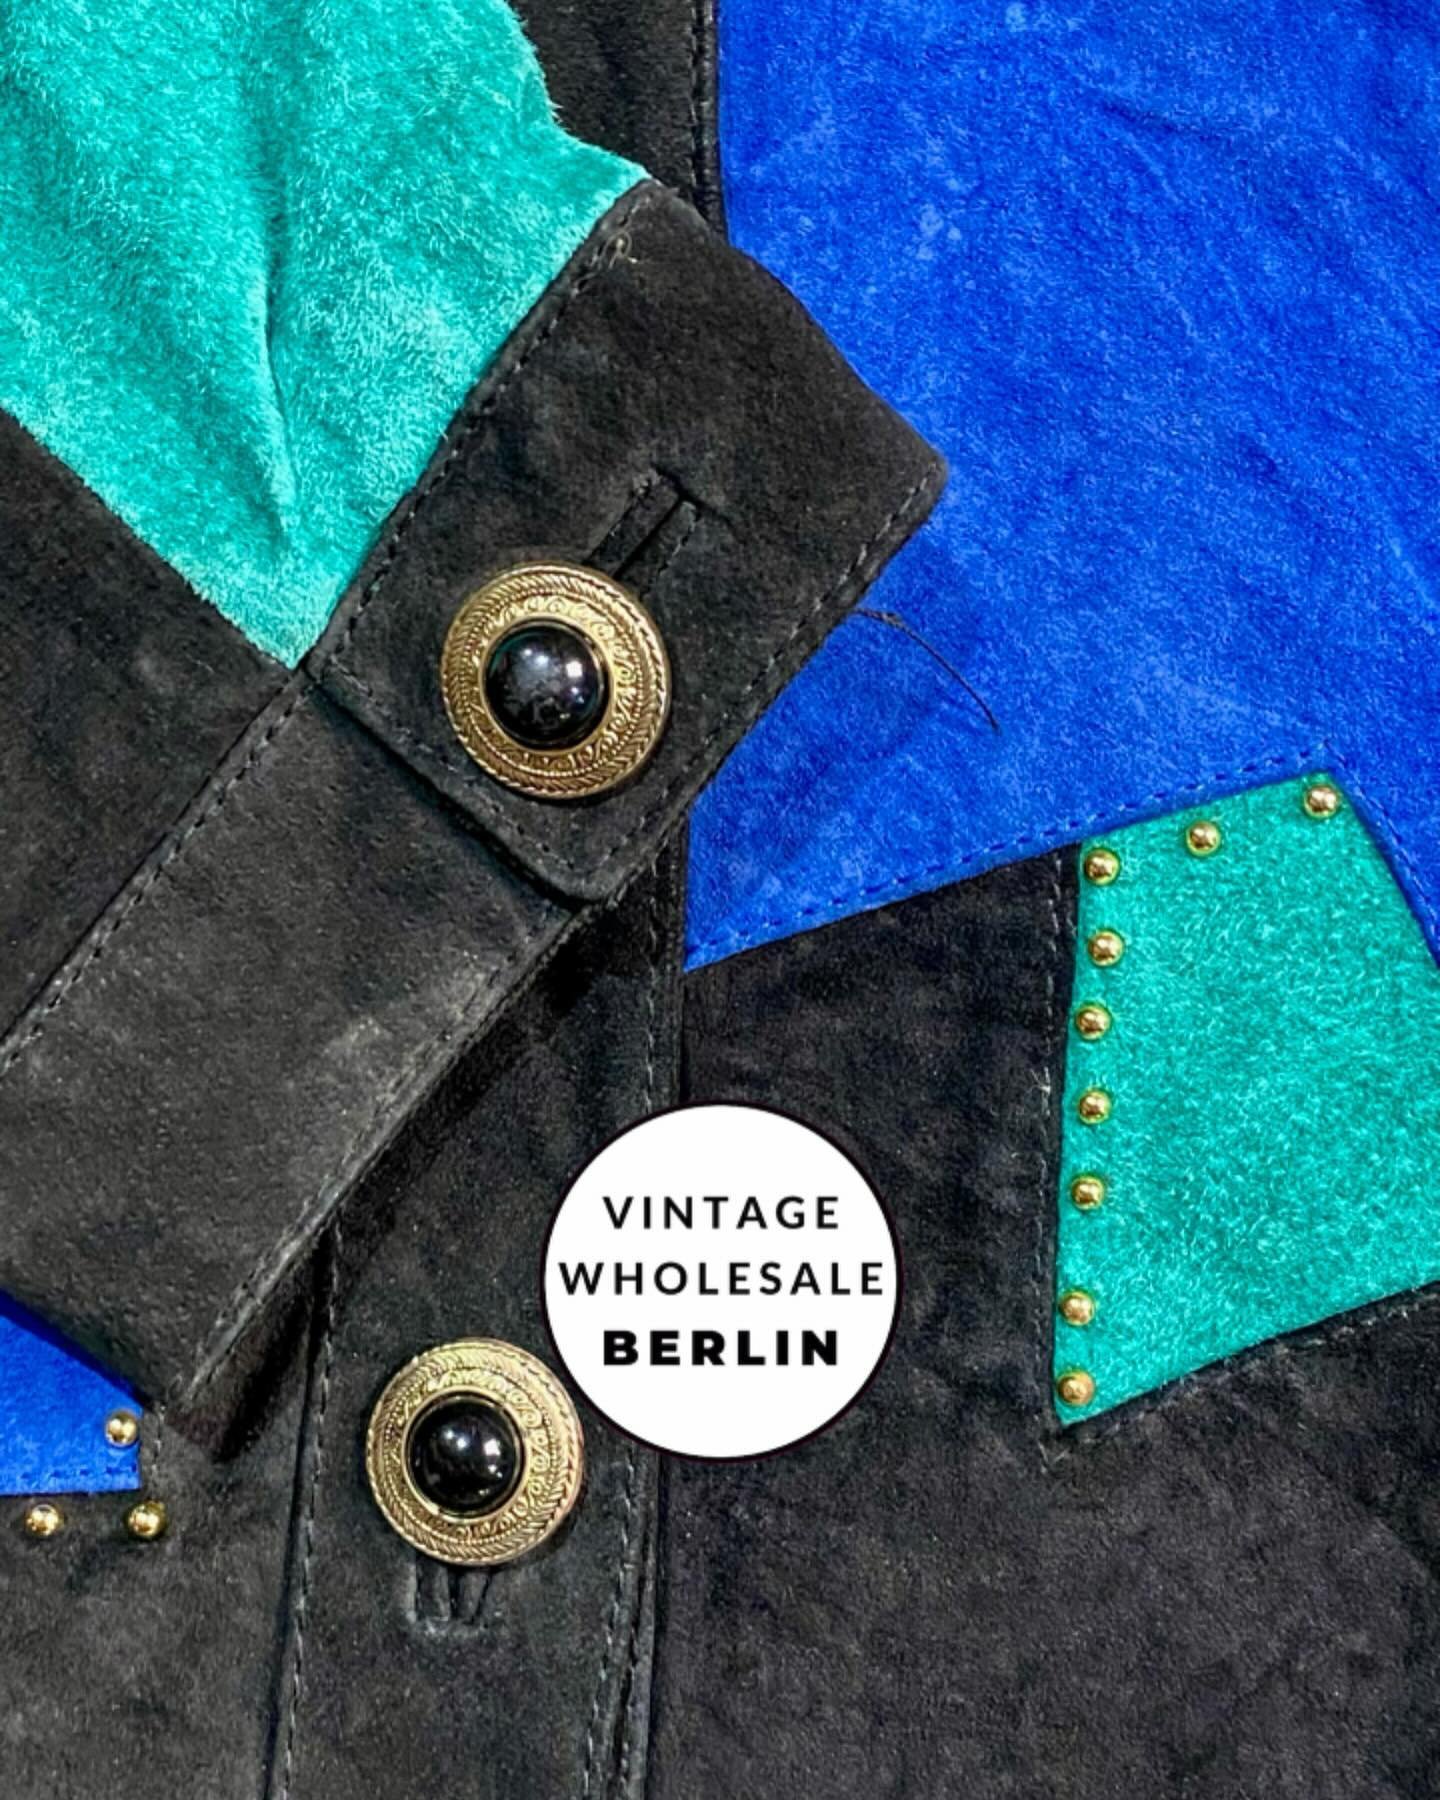 FUNKY 80&lsquo;s VINTAGE LEATHER JACKETS
👇 @vintage_wholesale_berlin 👇

Hear and feel: turn on the sound to get a true impression of original 80&rsquo;s vintage leather 🔈

This time, we&rsquo;ve collected few rare and fancy vintage suede leather j